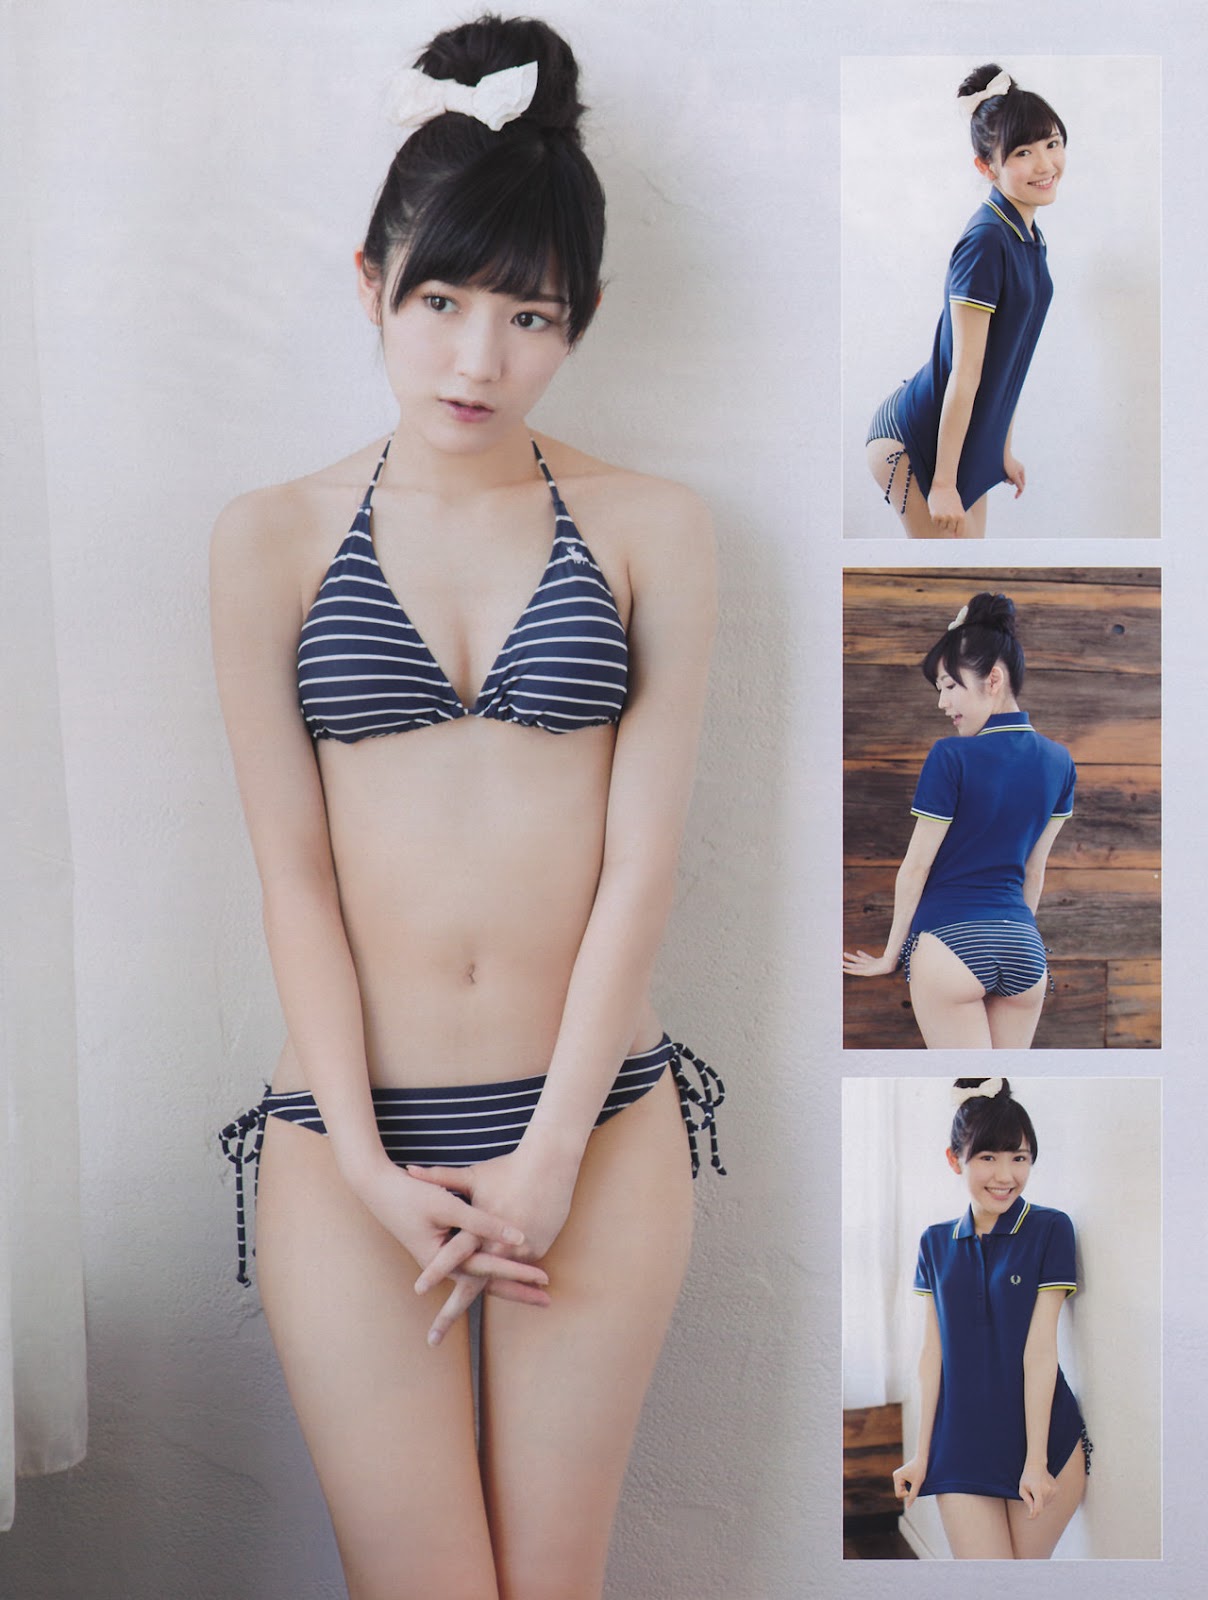 Mayu Watanabe's body shape from waist to thighs is too sexy